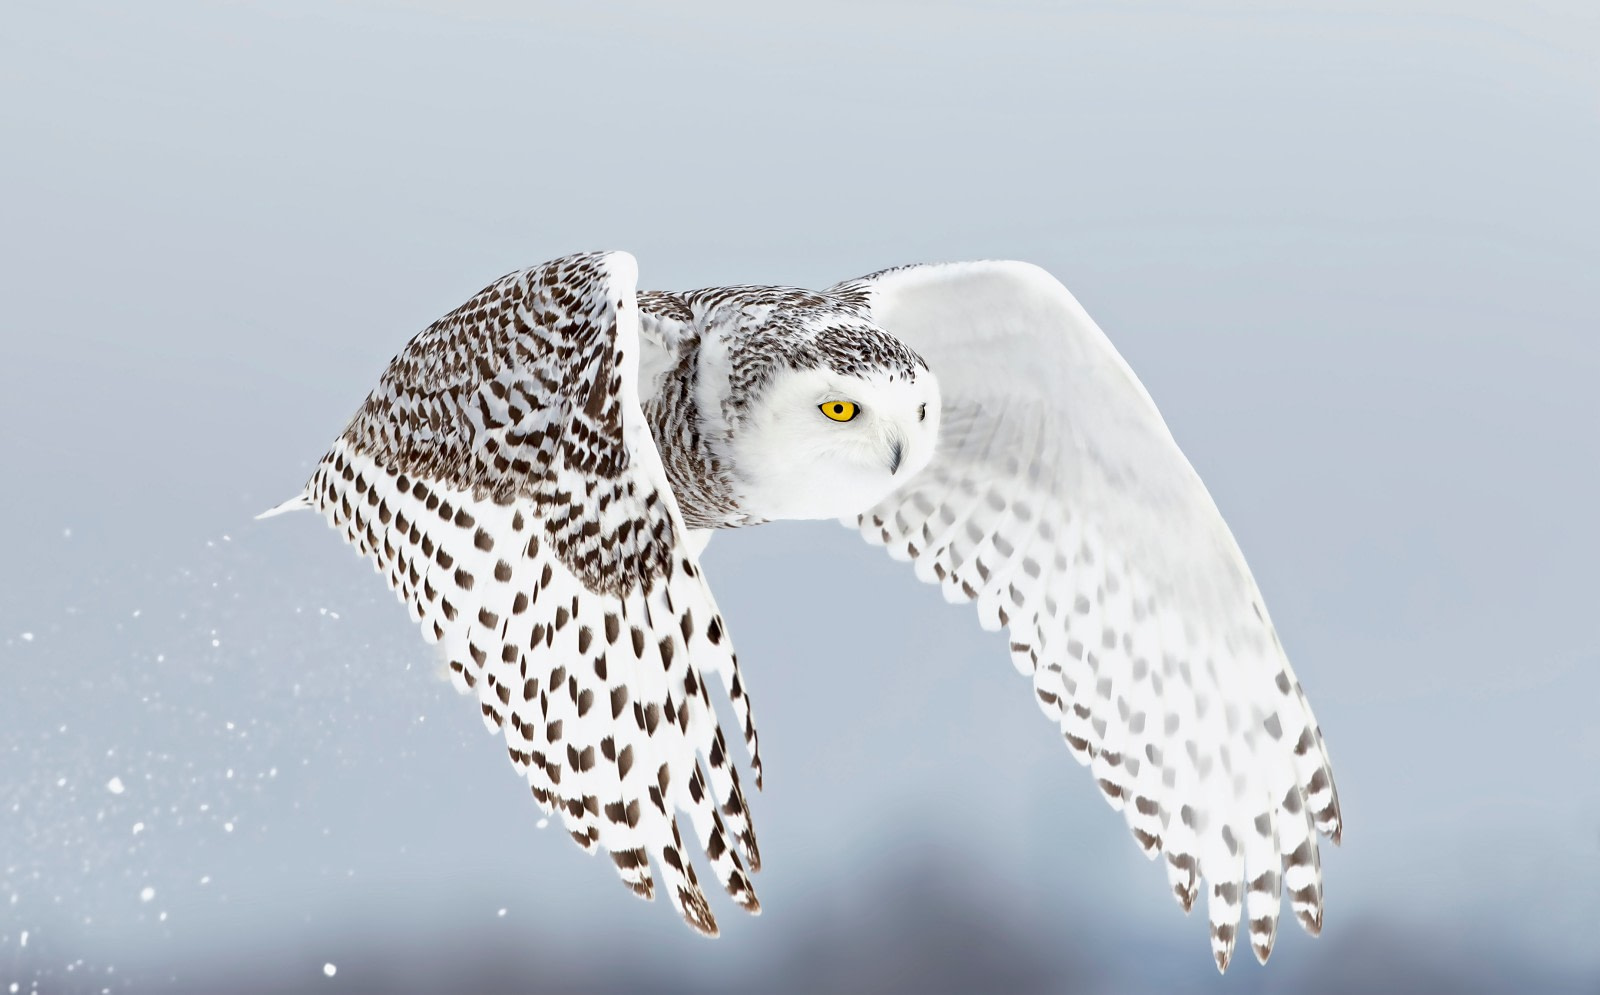 Secrets of the Snowy Owl: Habitat, Adaptations, and Other Facts